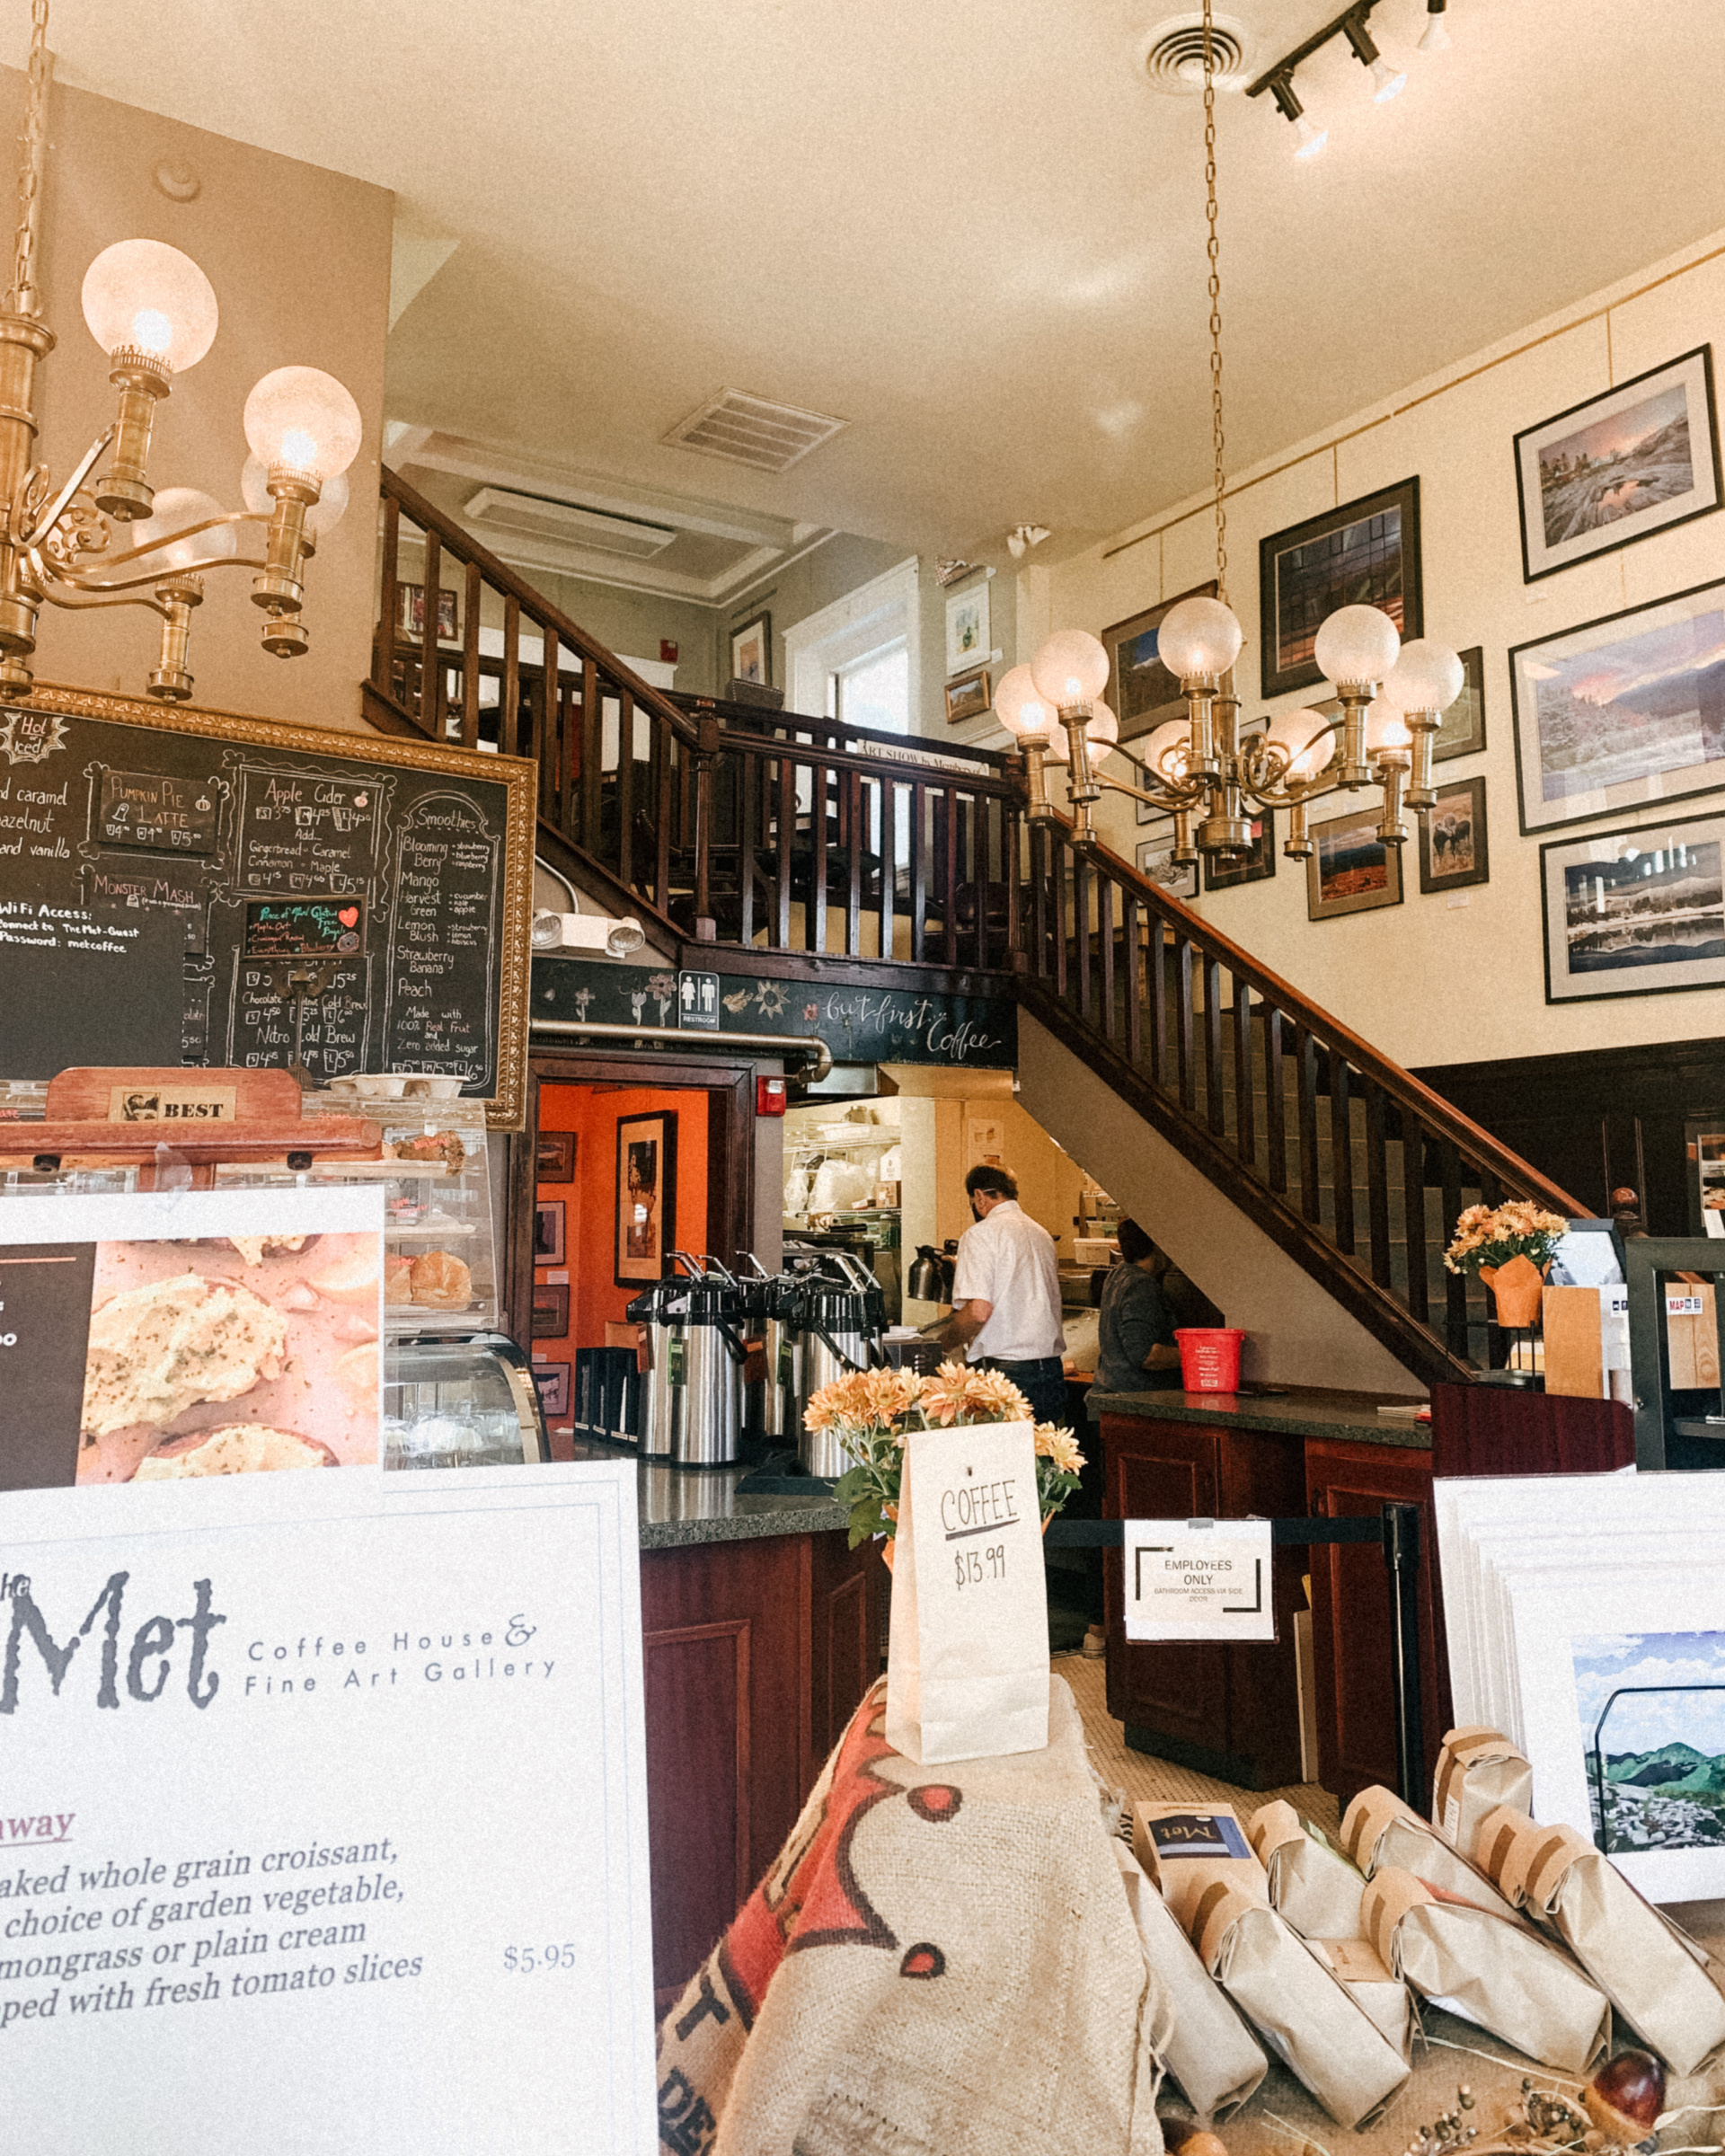 North Conway, New Hampshire Travel Guide - The Met Coffee House - Simply by Simone - #newengland #travel #newhampshire #roadtrip #westchestercounty #northconway #newhampshiretravel #mountwashington #newenglandtravel 